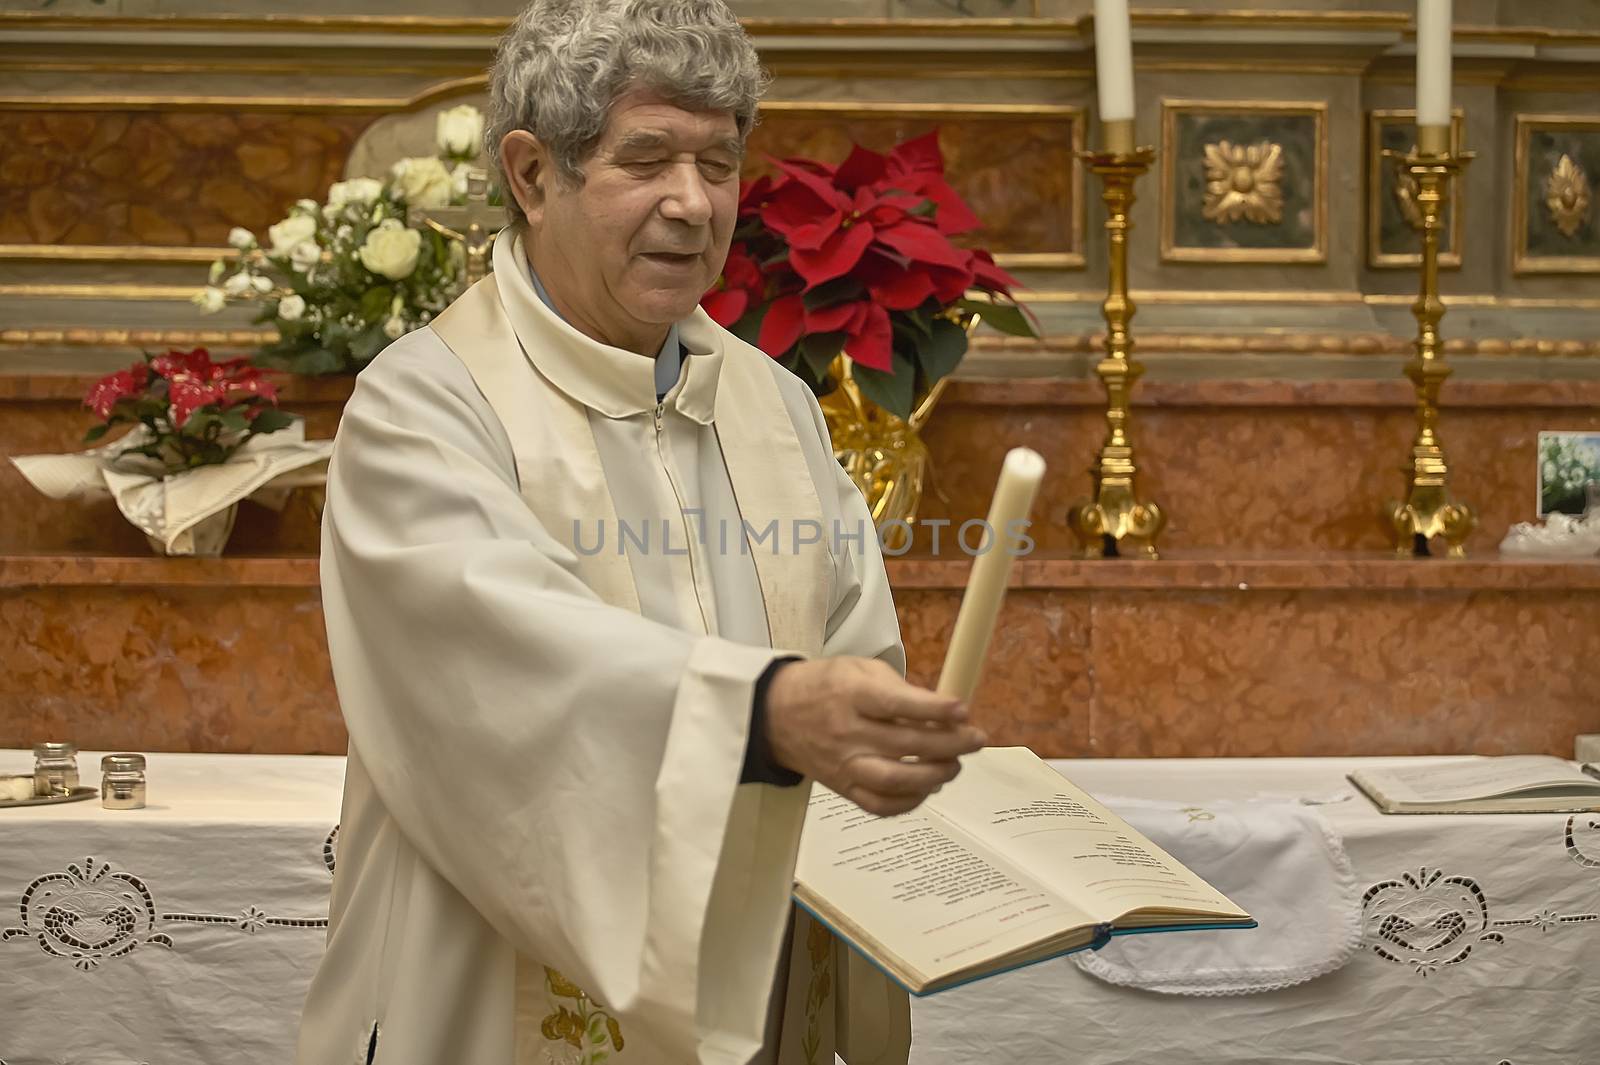 Priest gives the candle to baptism by pippocarlot